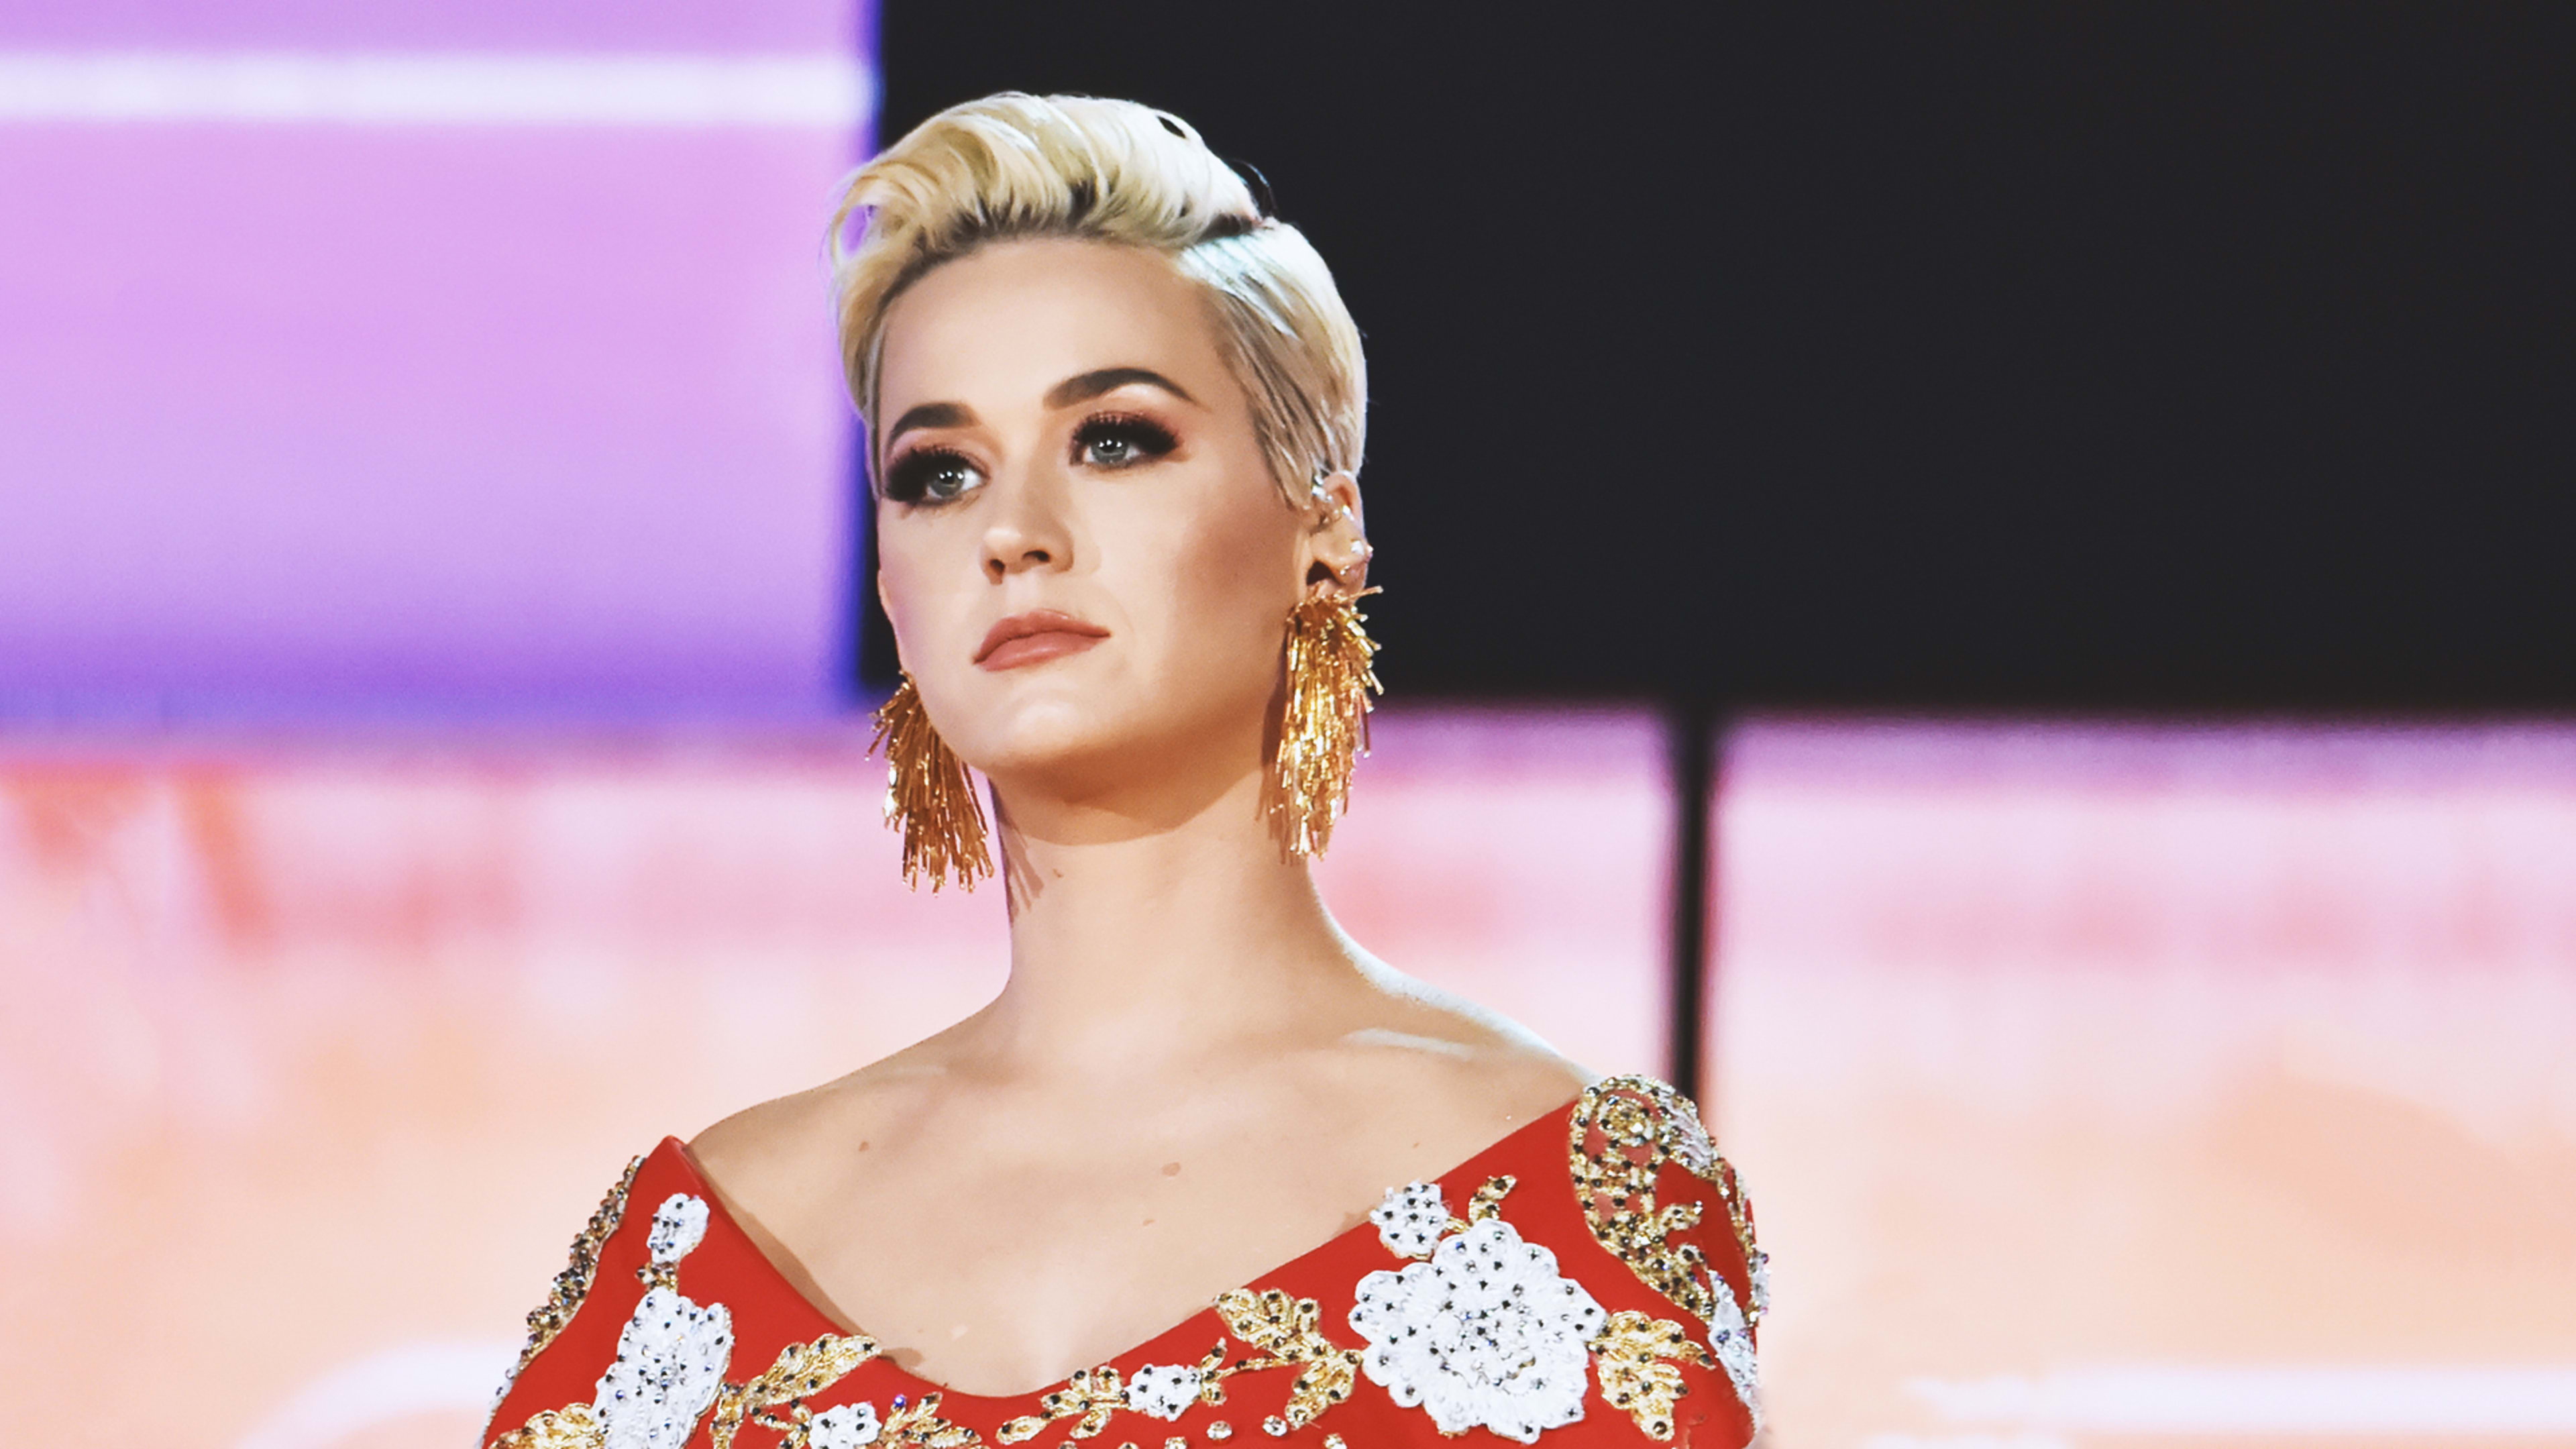 Katy Perry is next in line to offend with “blackface” shoes